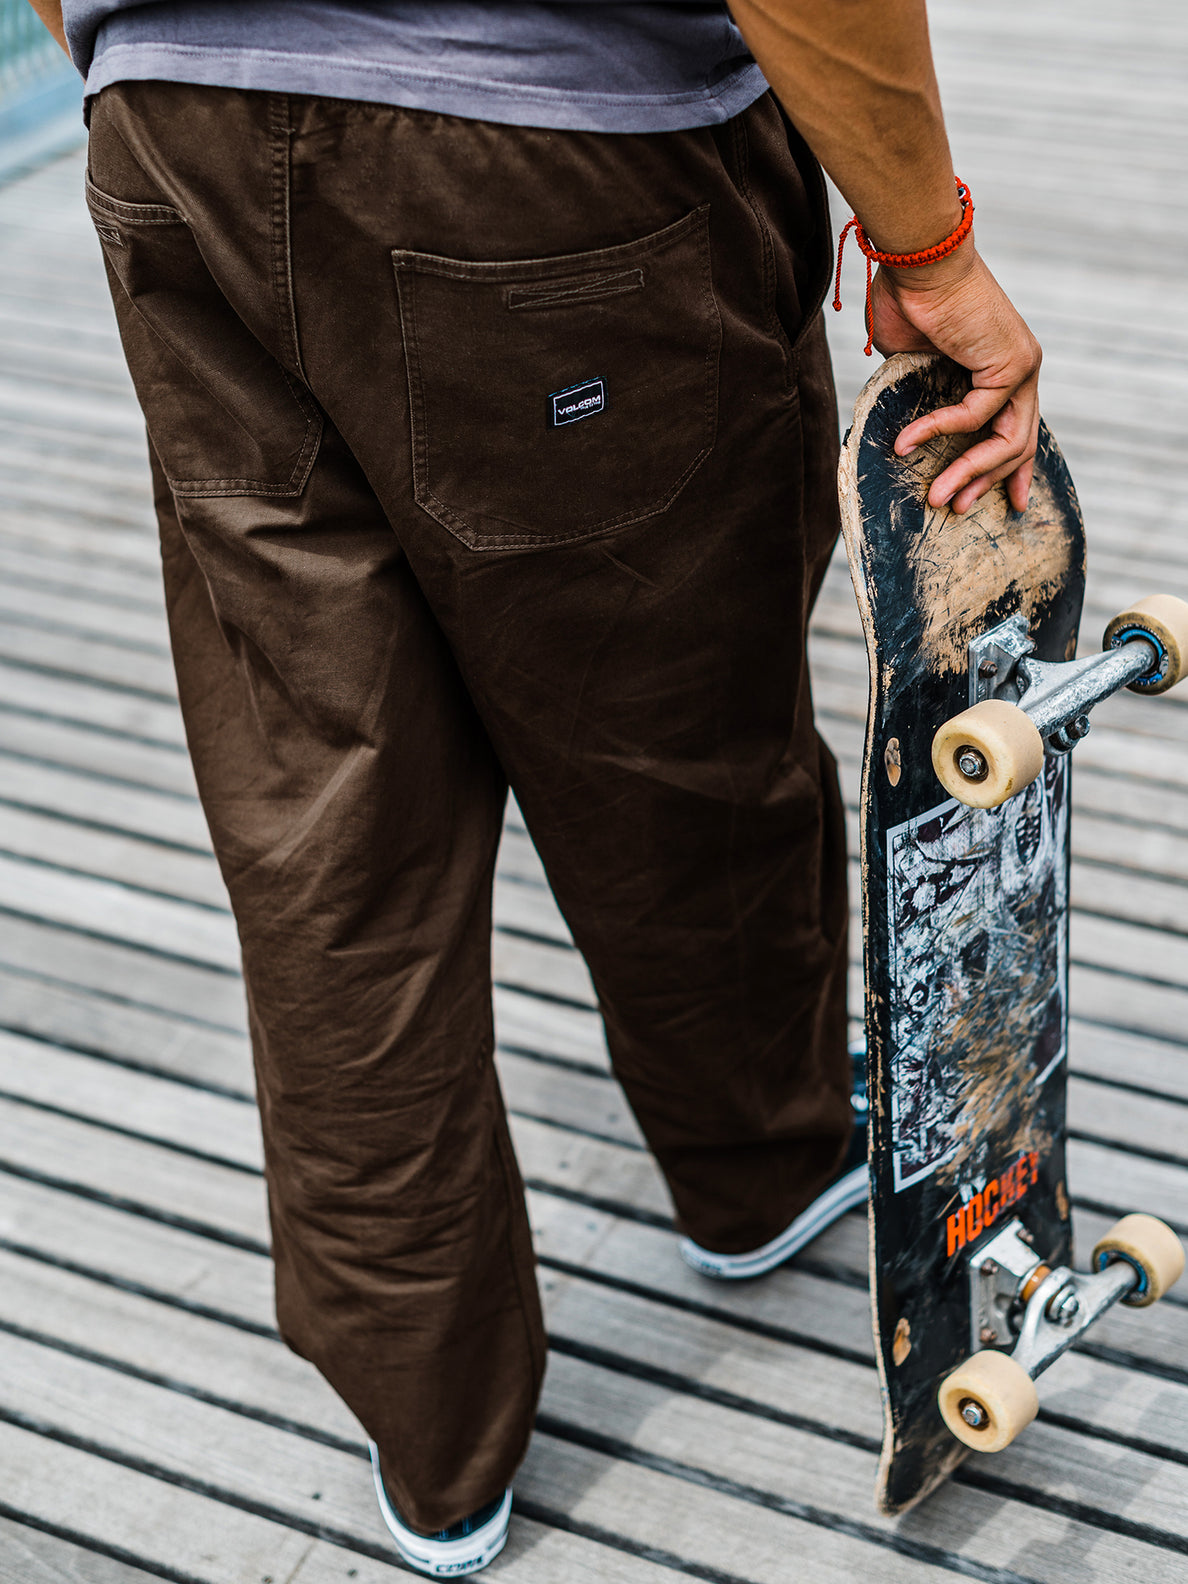 Outer Spaced Casual Pants - Dark Brown